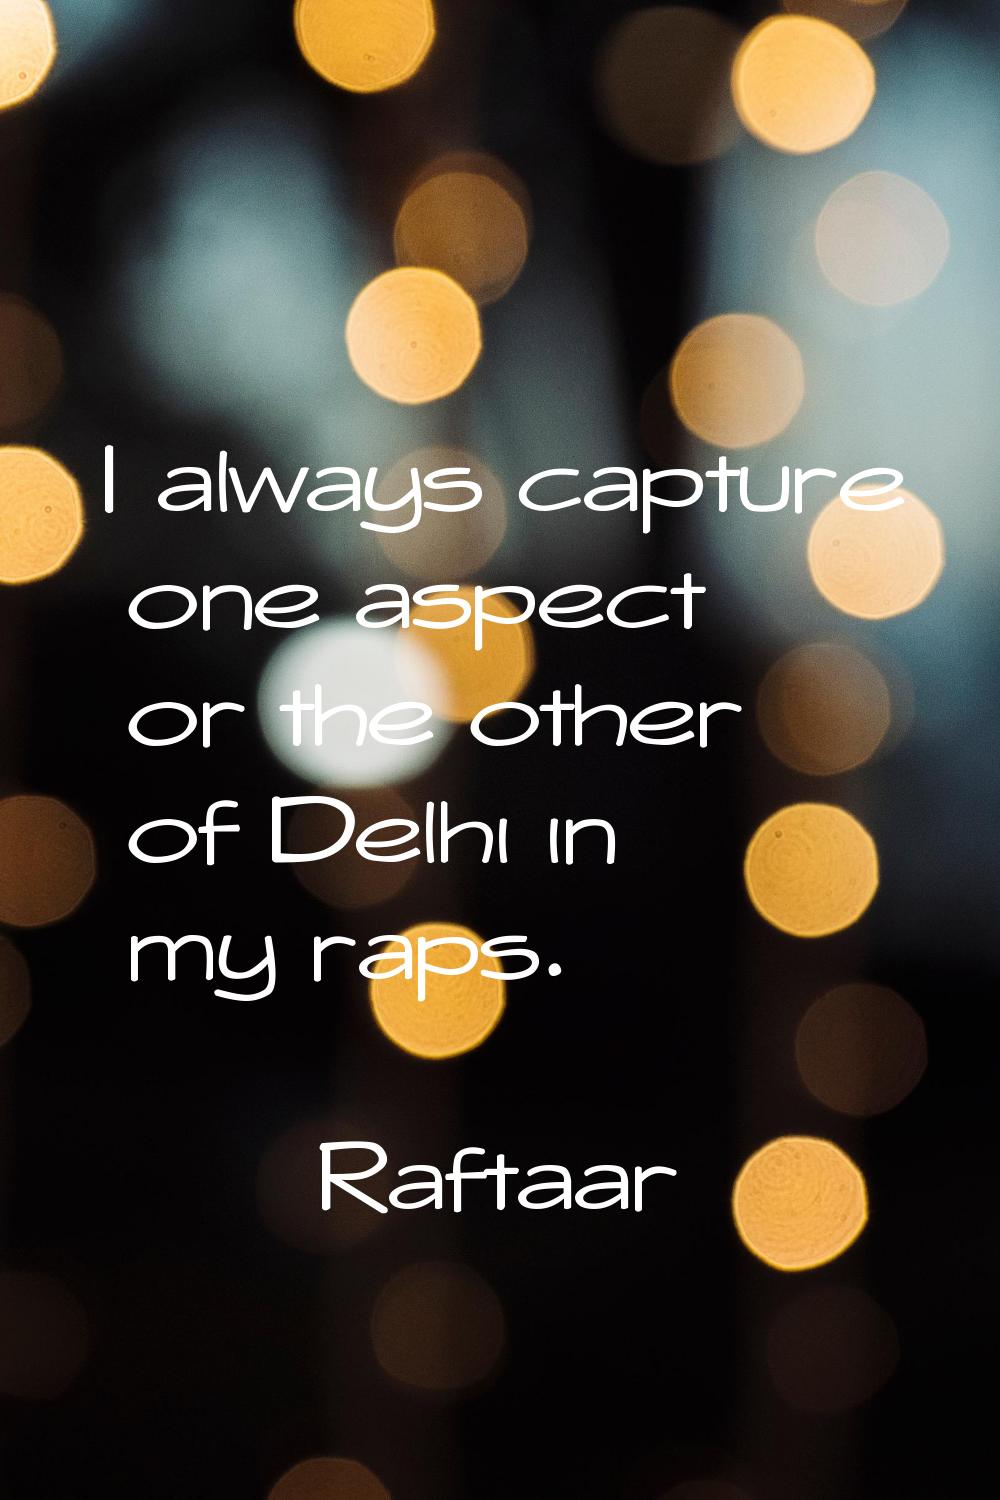 I always capture one aspect or the other of Delhi in my raps.